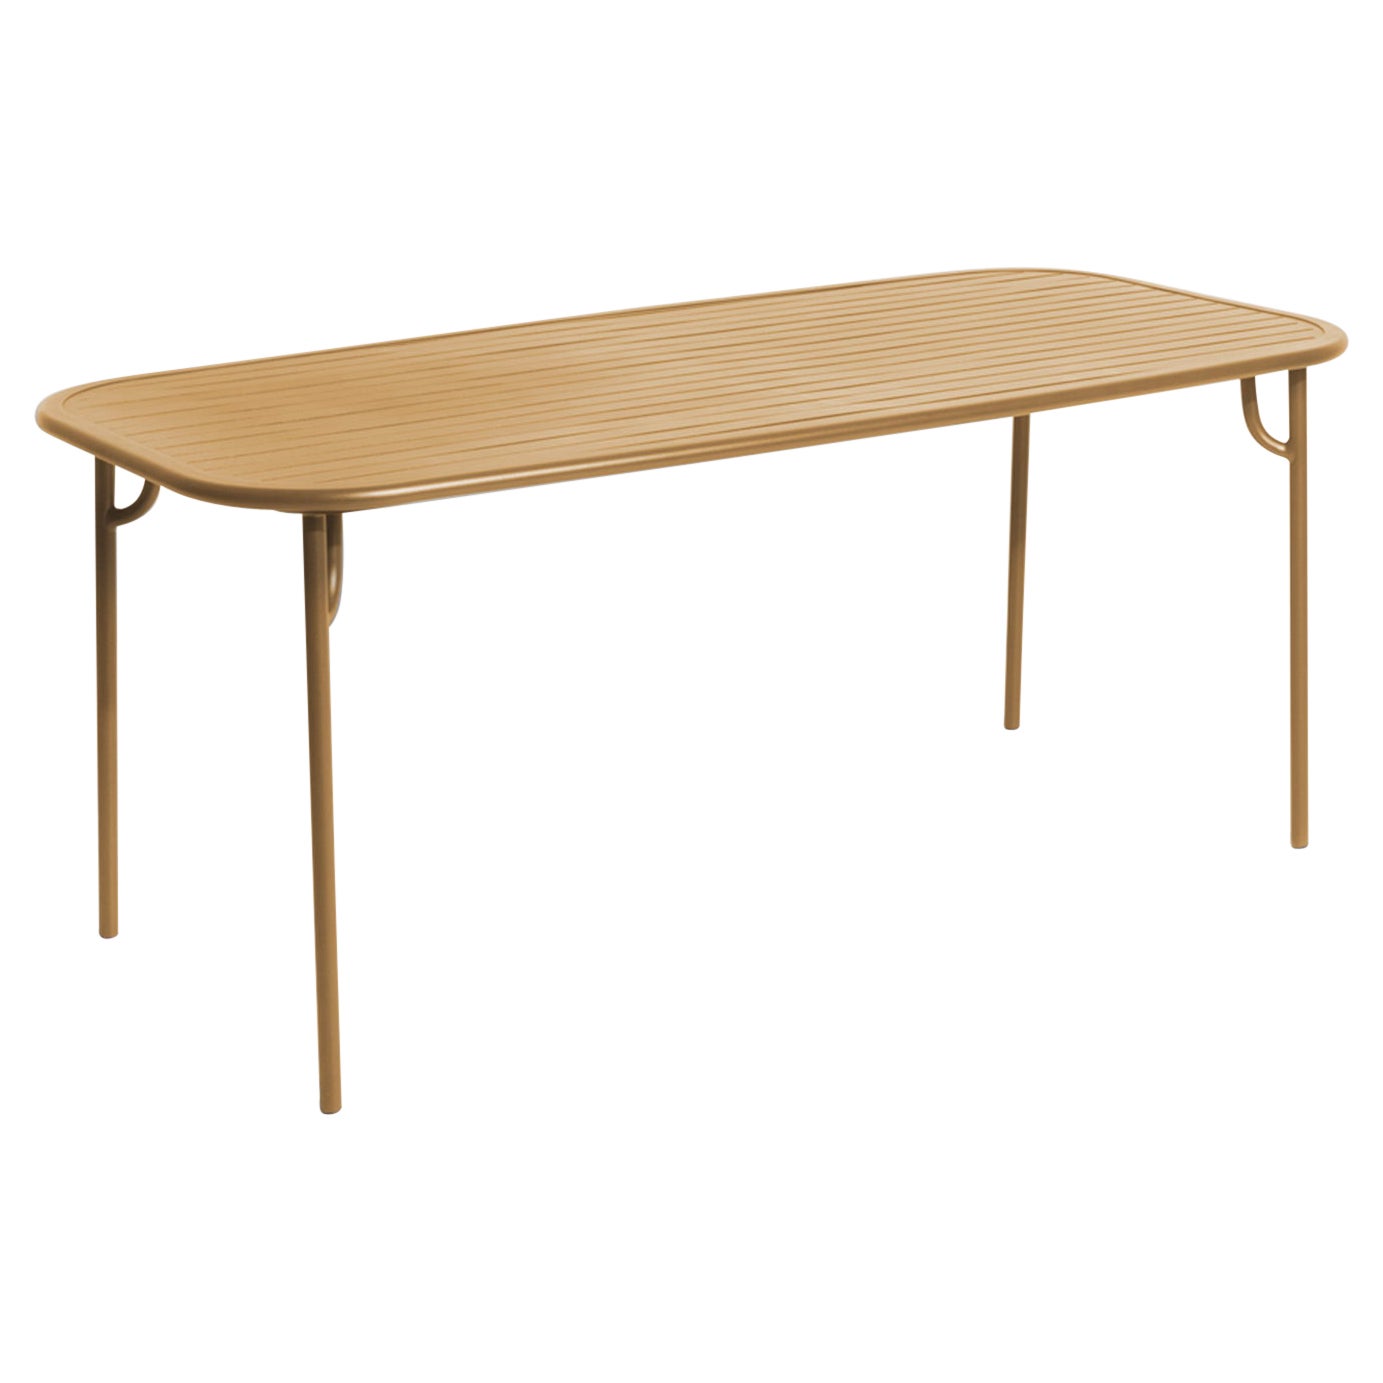 Petite Friture Week-End Medium Rectangular Dining Table in Gold with Slats